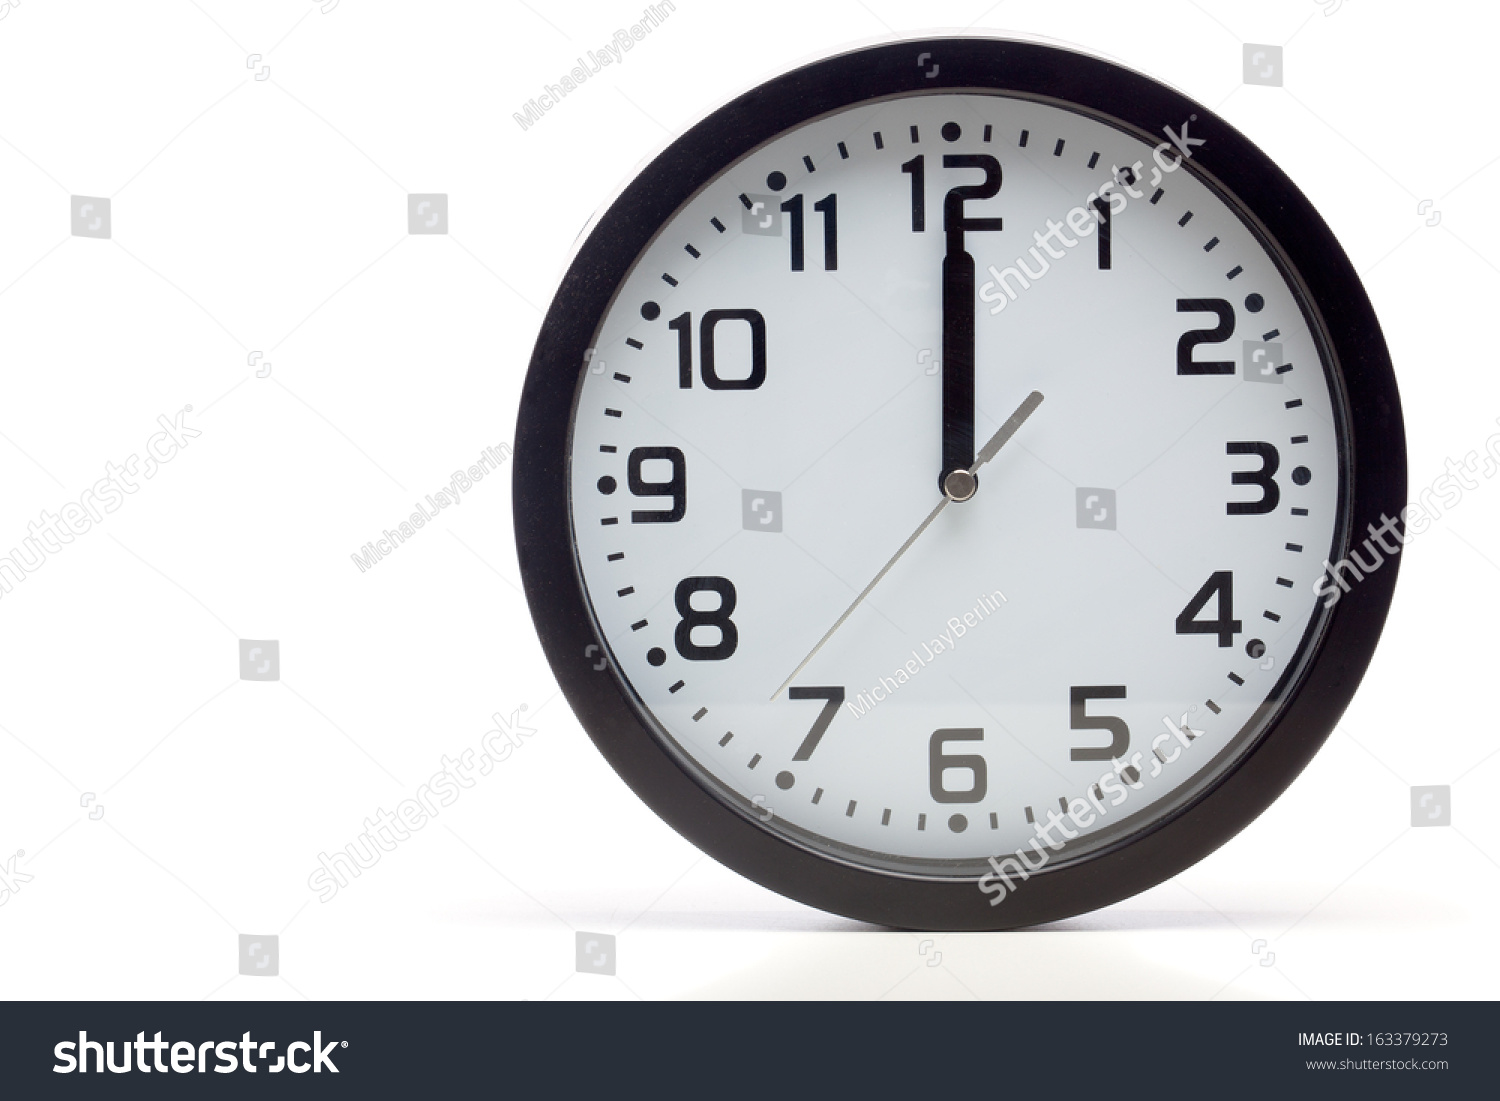 Analog Clock With Black Frame, Showing Time Of 12 O'Clock Sharp, Noon ...